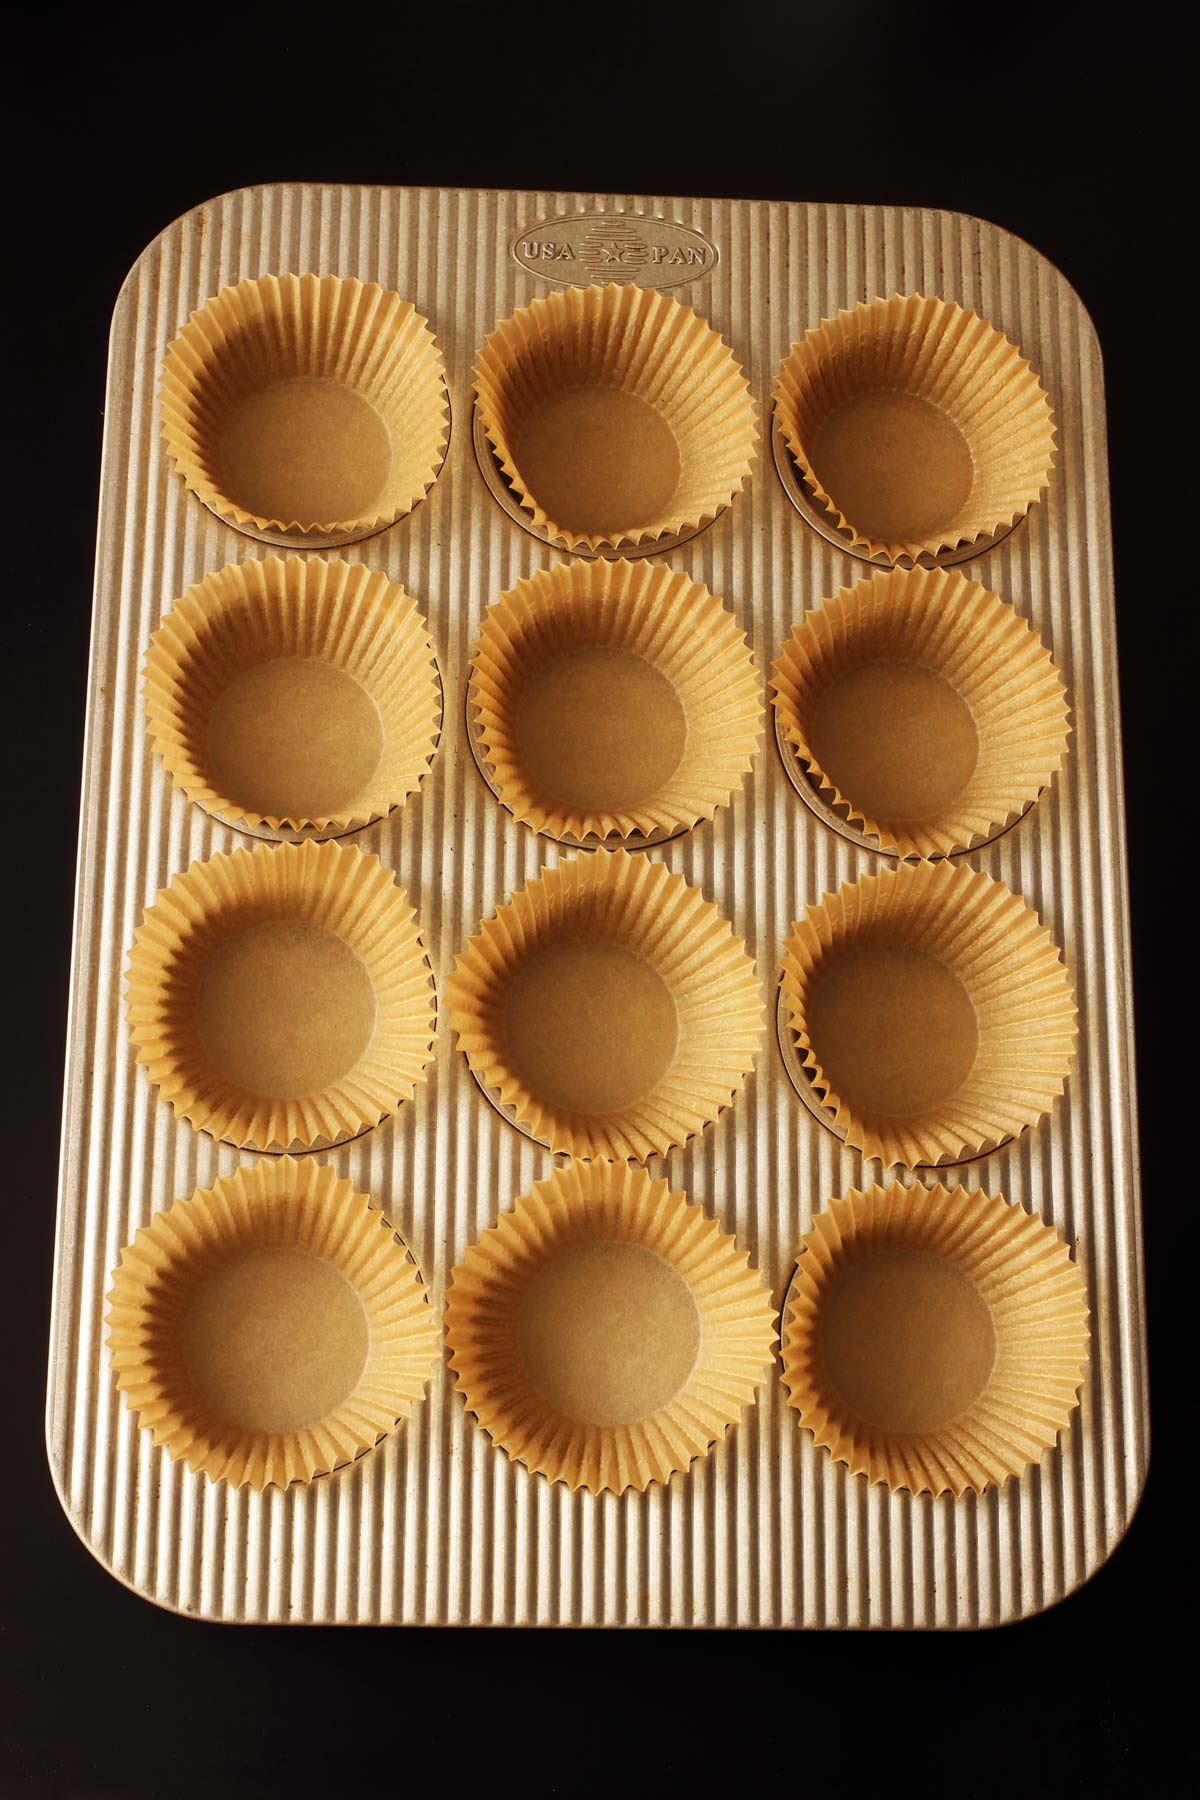 muffin papers in USA pan